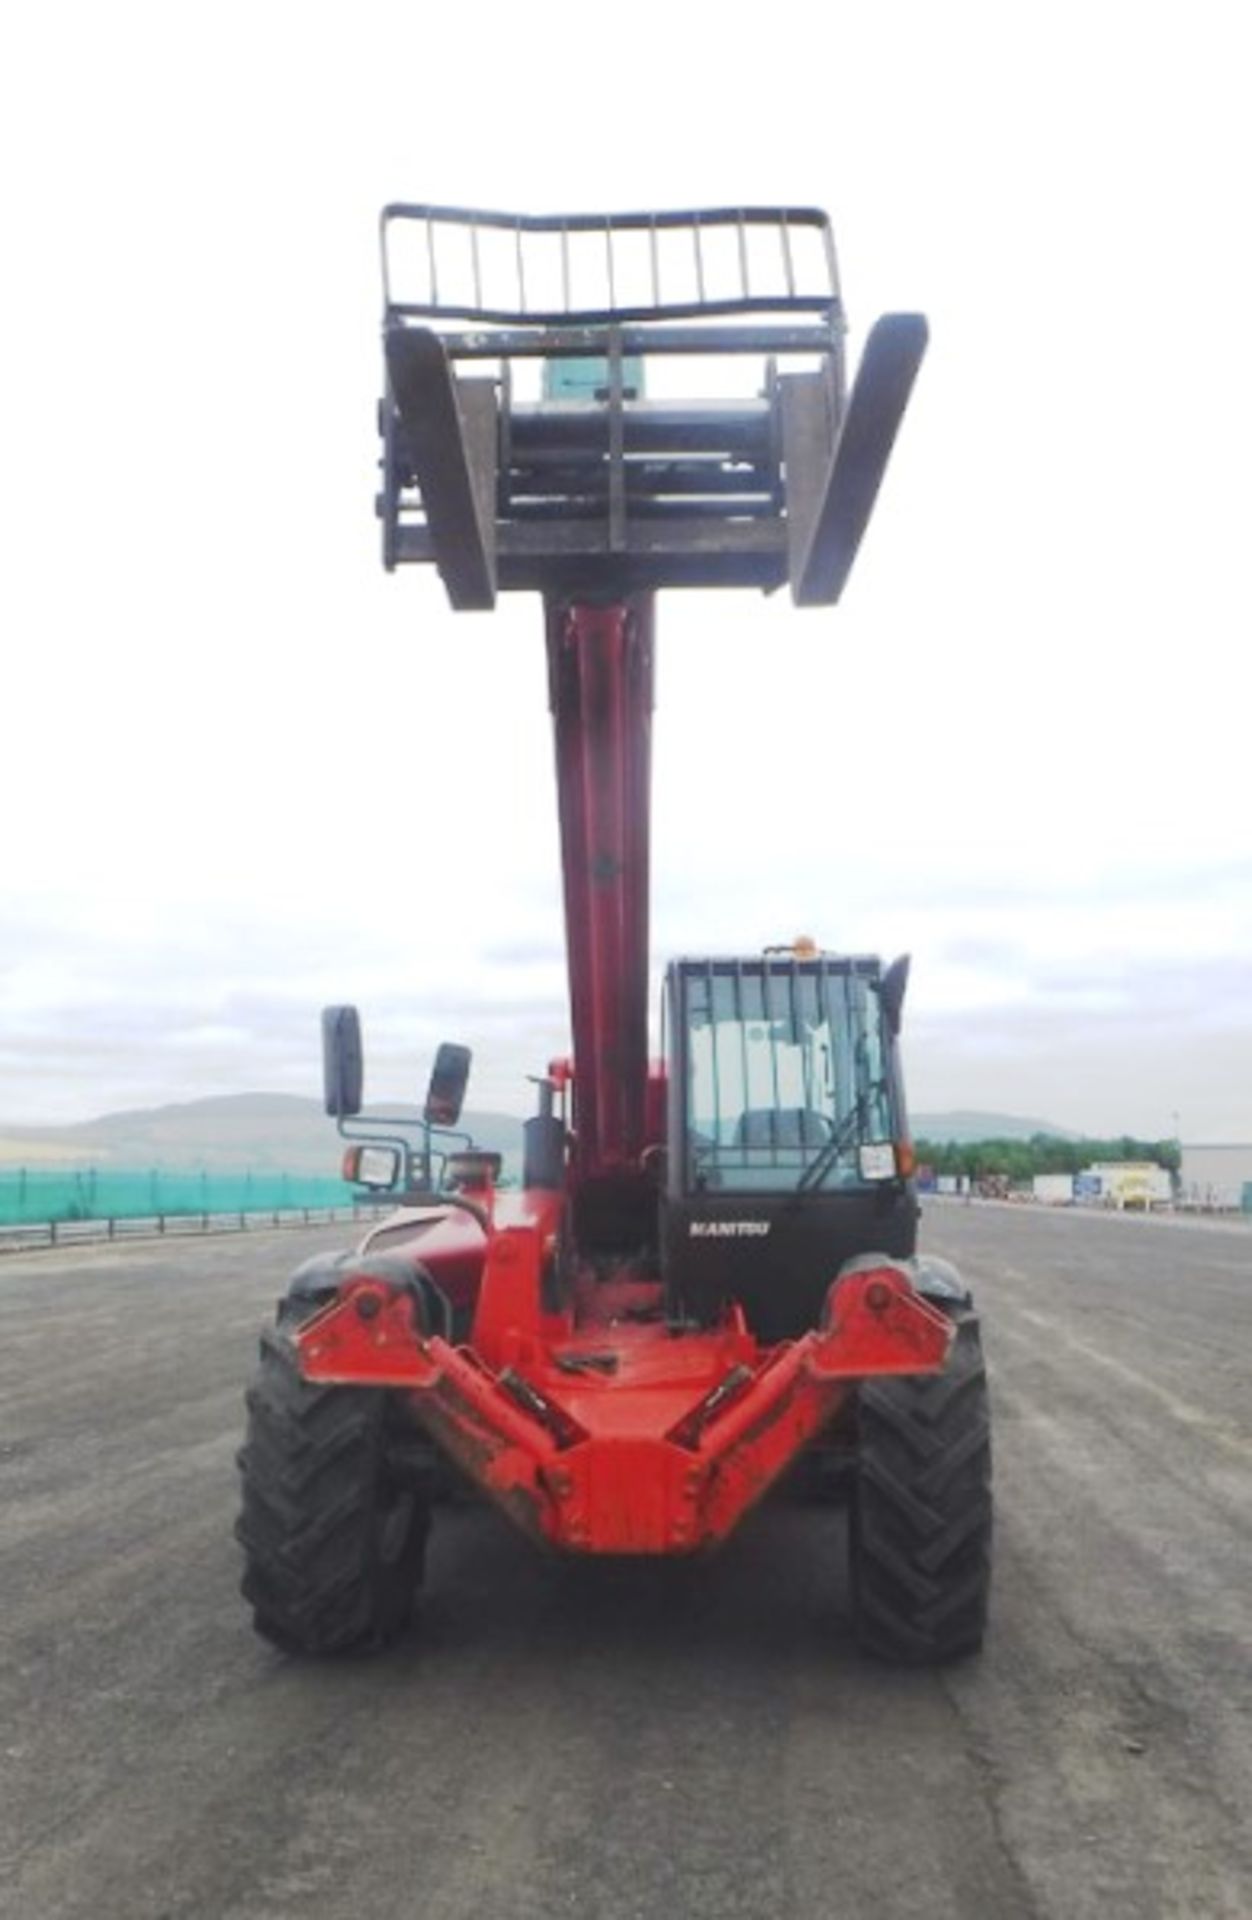 2006 MANITOU 14/35 TELEHANDLER c/w bucket & forks s/n 1230044 Reg no SP06 AXX 2646hrs (not verified) - Image 25 of 31